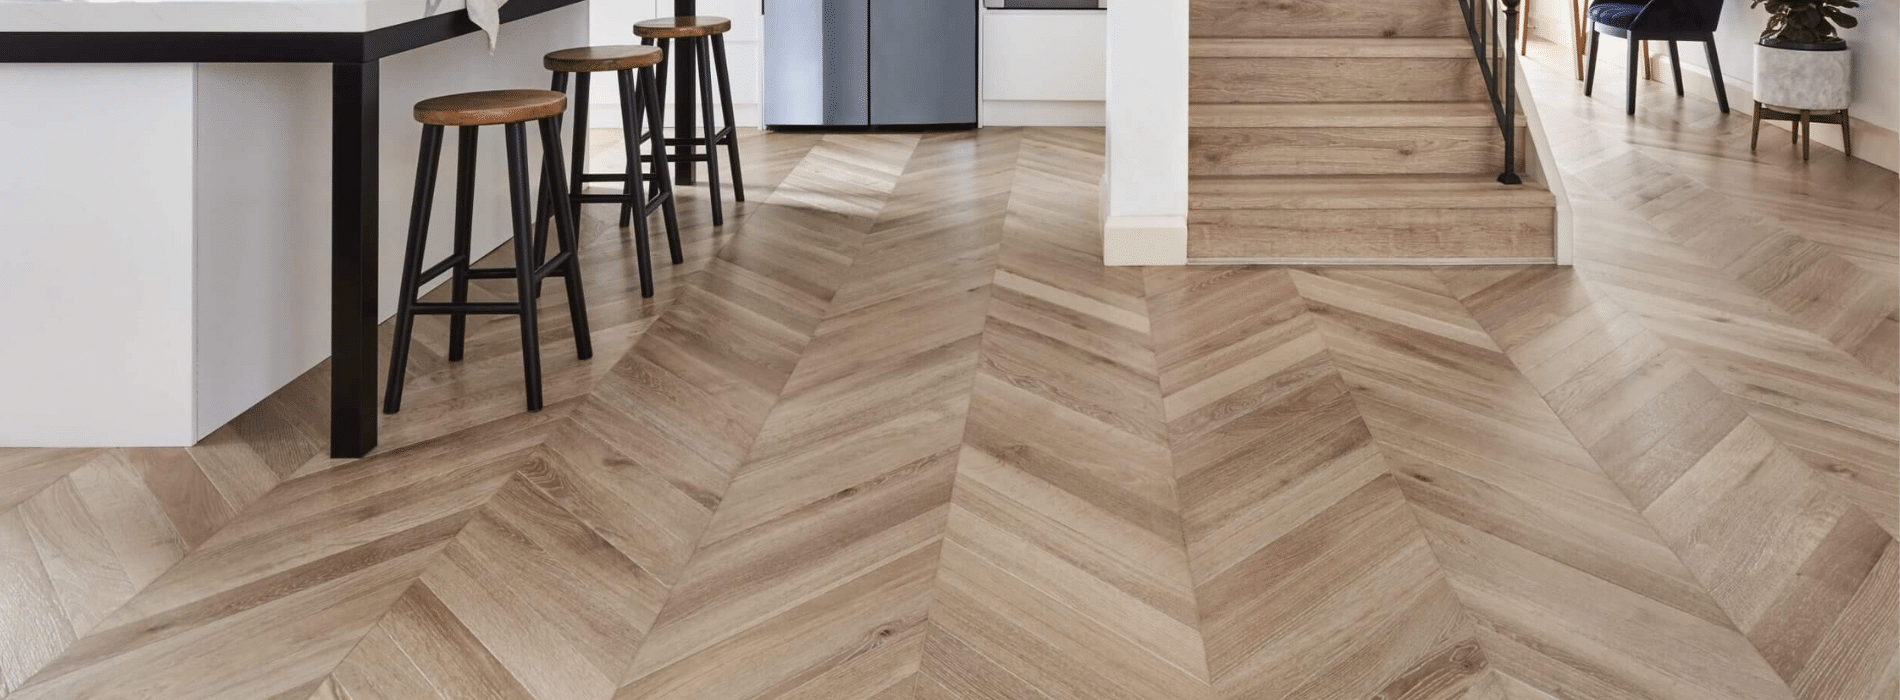 Harold Wood, RM3: Marvel at the remarkable restoration by Mr Sander®. Meticulous care revives five-year-old engineered oak floors, enhanced with a mid-oak stain for a warm and inviting look. Four coats of Junckers Strong satin finish ensure lasting durability.